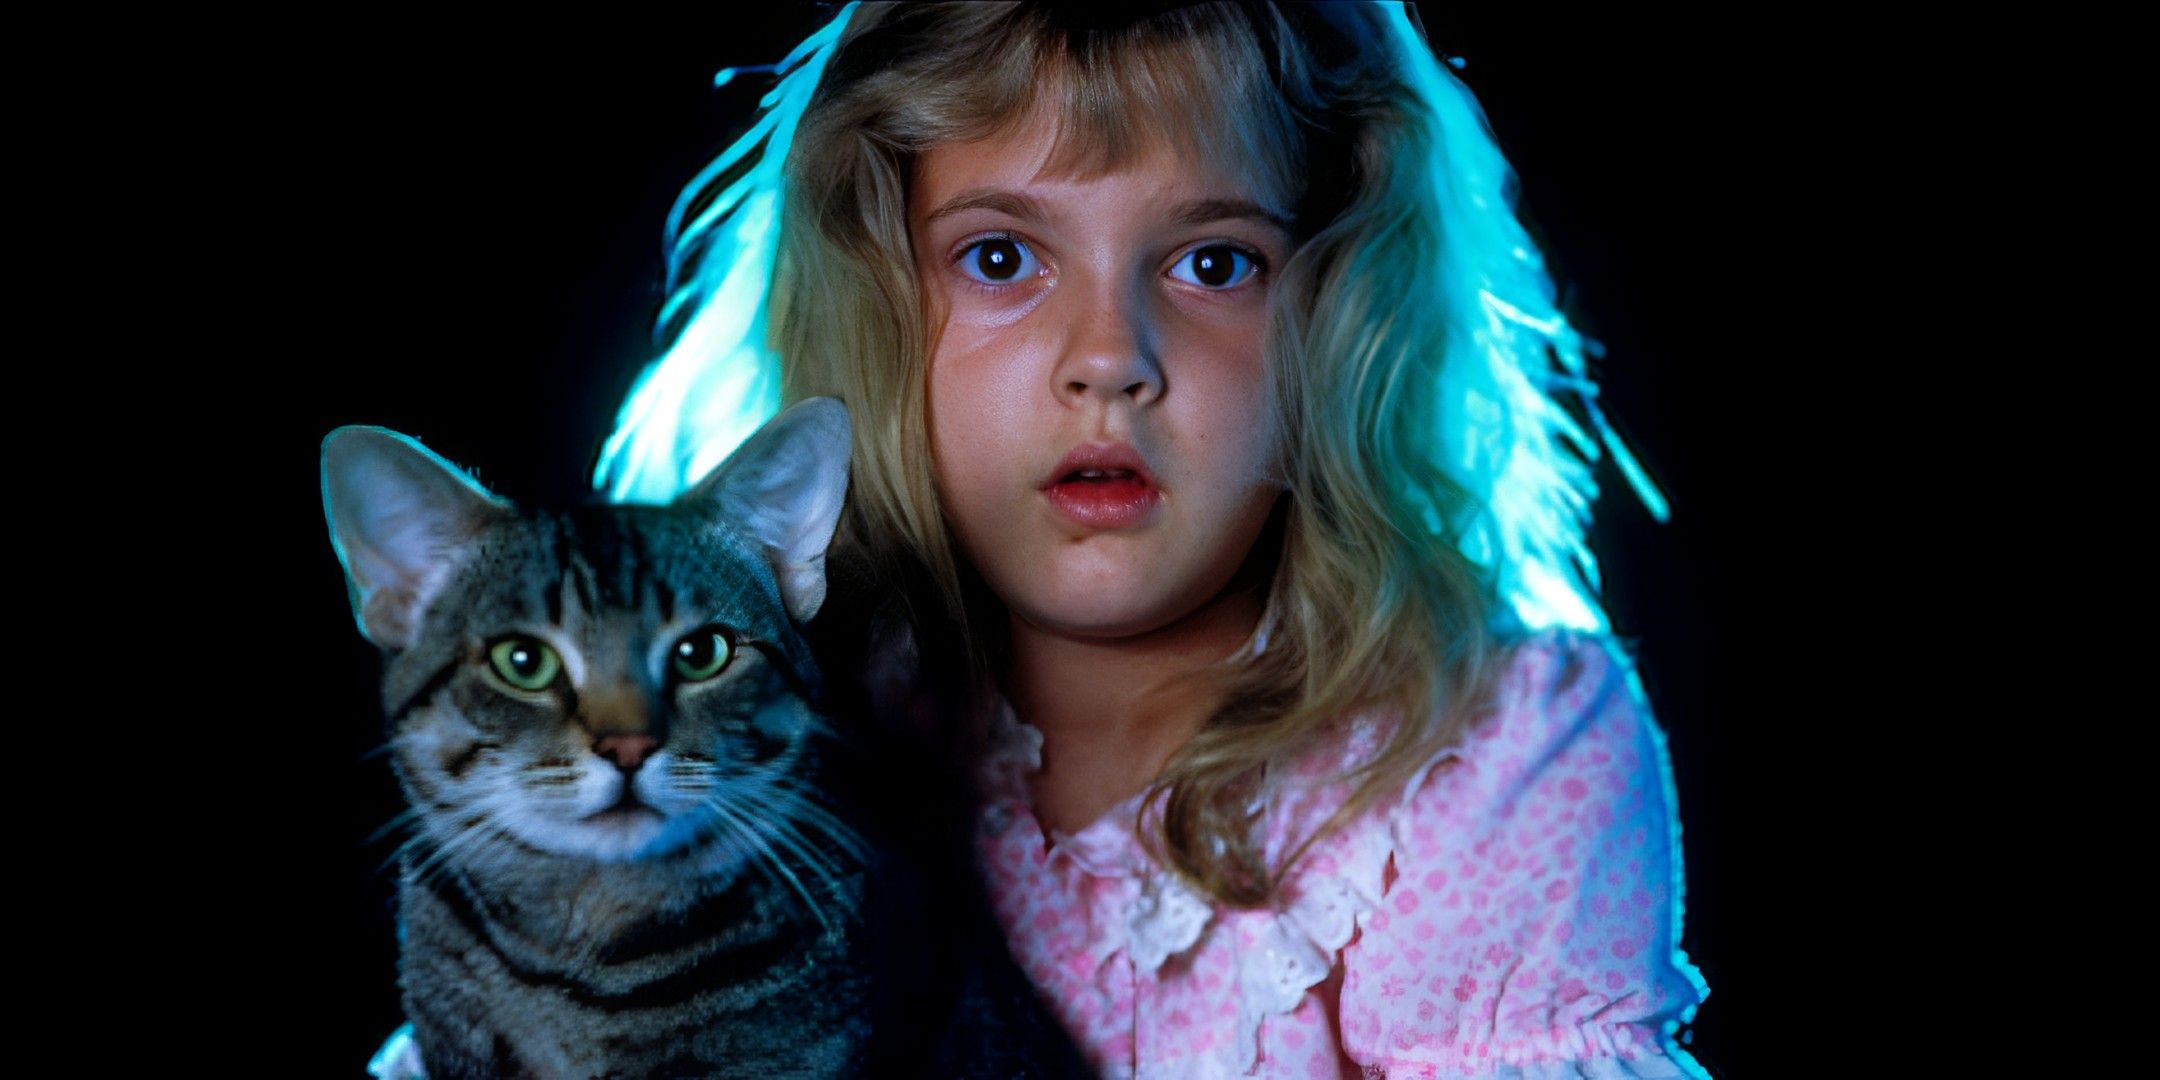 A young Drew Barrymore looking straight ahead shocked while holding a cat in Cat's Eye movie poster.